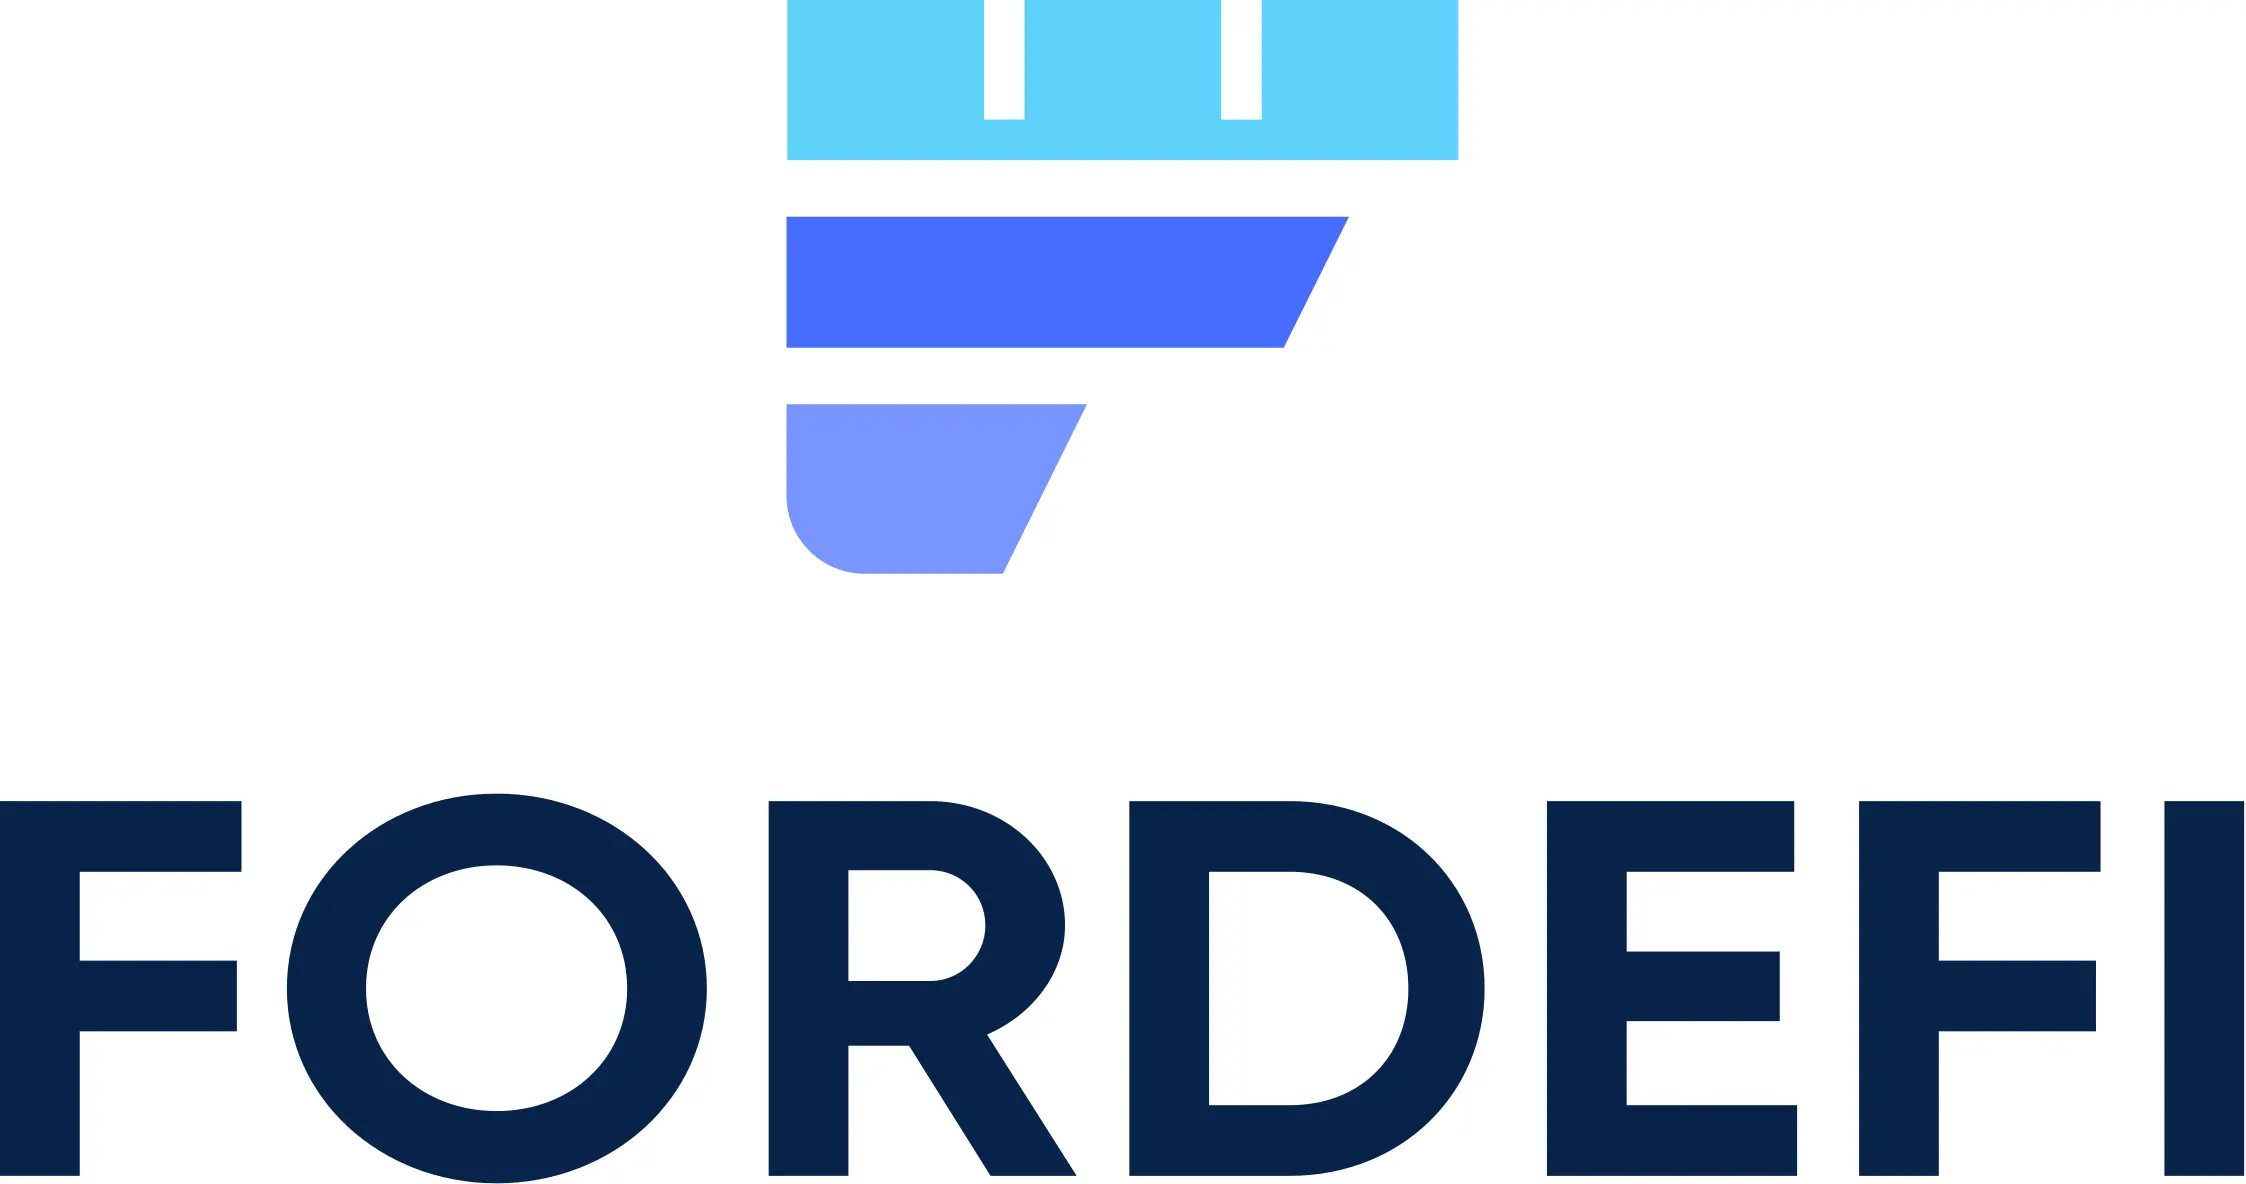 Fordefi logo- vertical - use this one